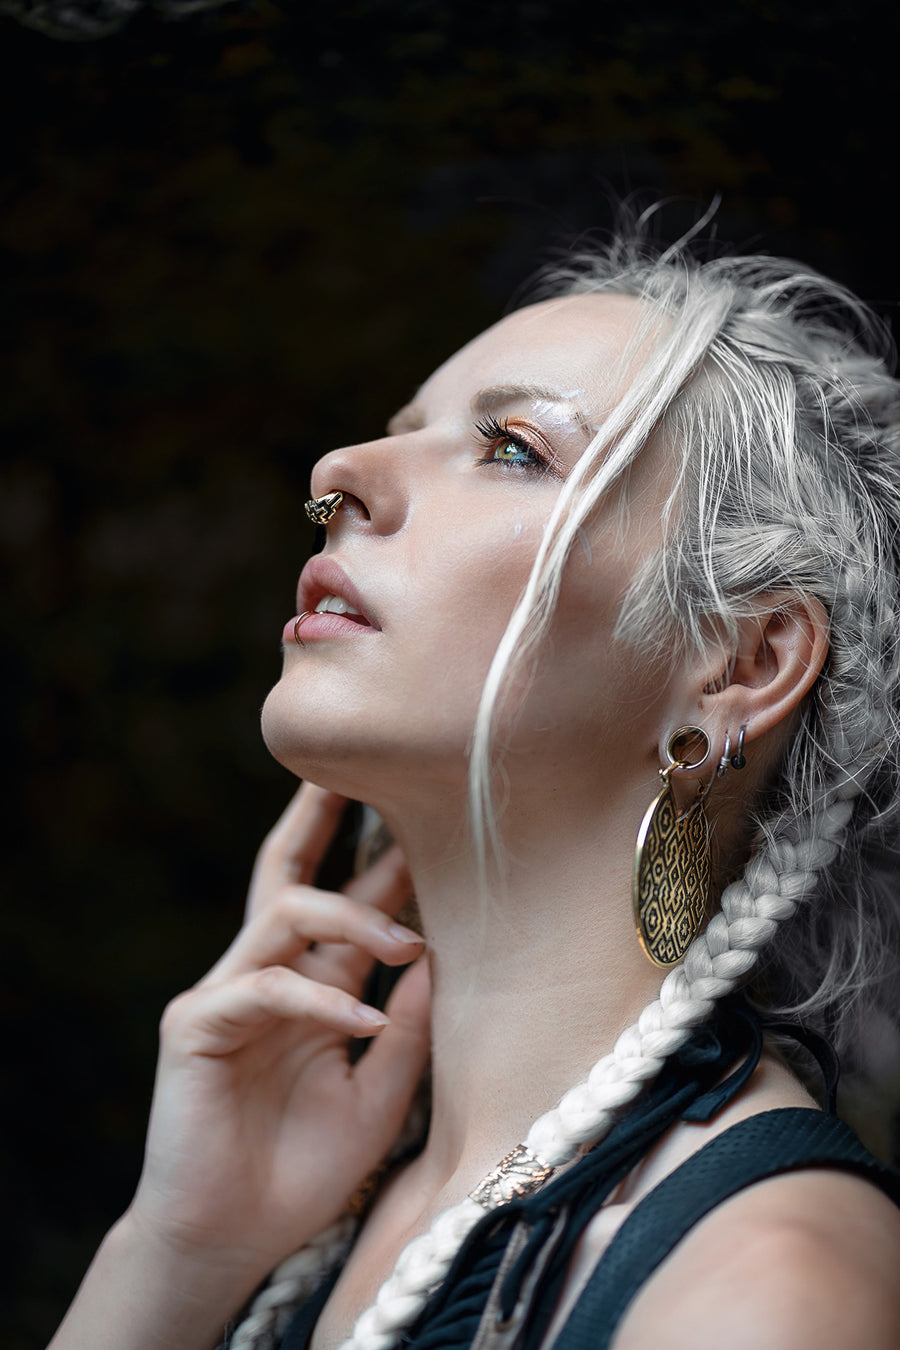 An image capturing a woman in a thoughtful pose, her gaze lifted skyward. She showcases intricate, disc-shaped earrings adorned with a detailed pattern, matched with a delicate septum ring. Her white hair, interwoven with braids and loose strands, cascades alongside her visage, adding to her ethereal appearance. Her expression is one of introspection and grace.